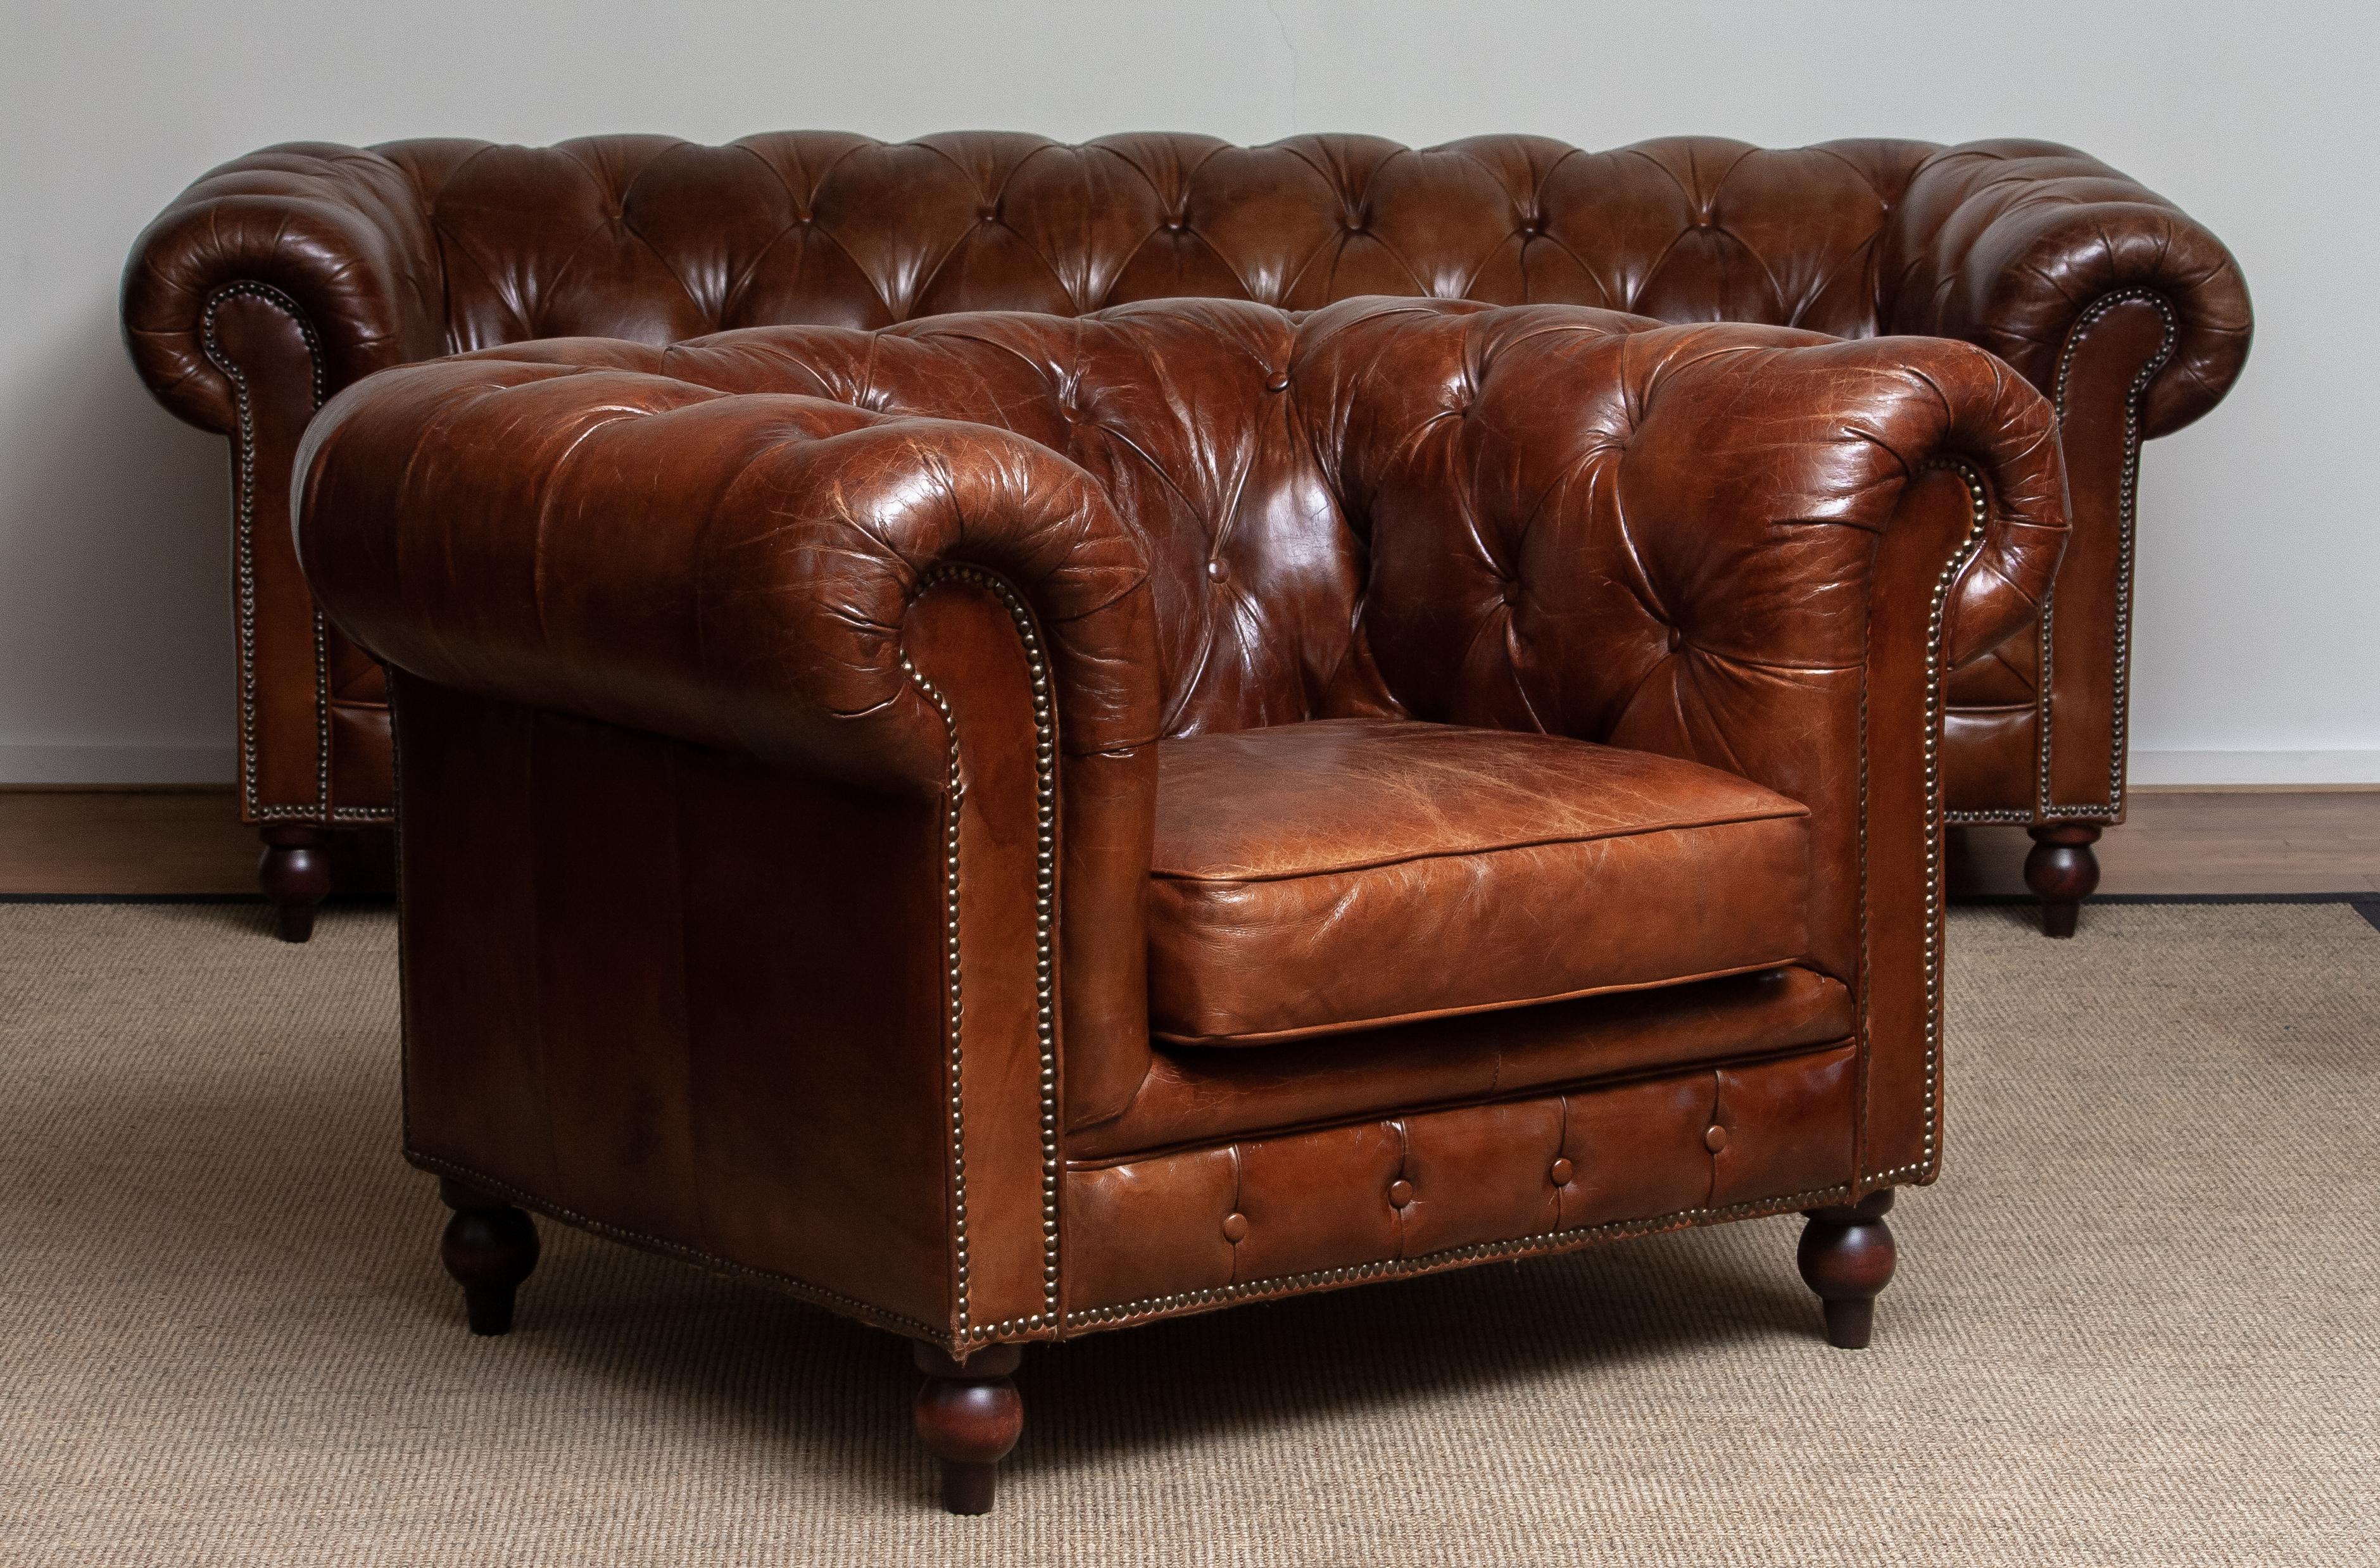 Chesterfield sofa and easy / lounge chair both in chocolate brown leather with a beautiful patina true the years. 
Always been together!
Underneath the seat cushions, filled with feather, is fully sprung therefor the seats are soft and